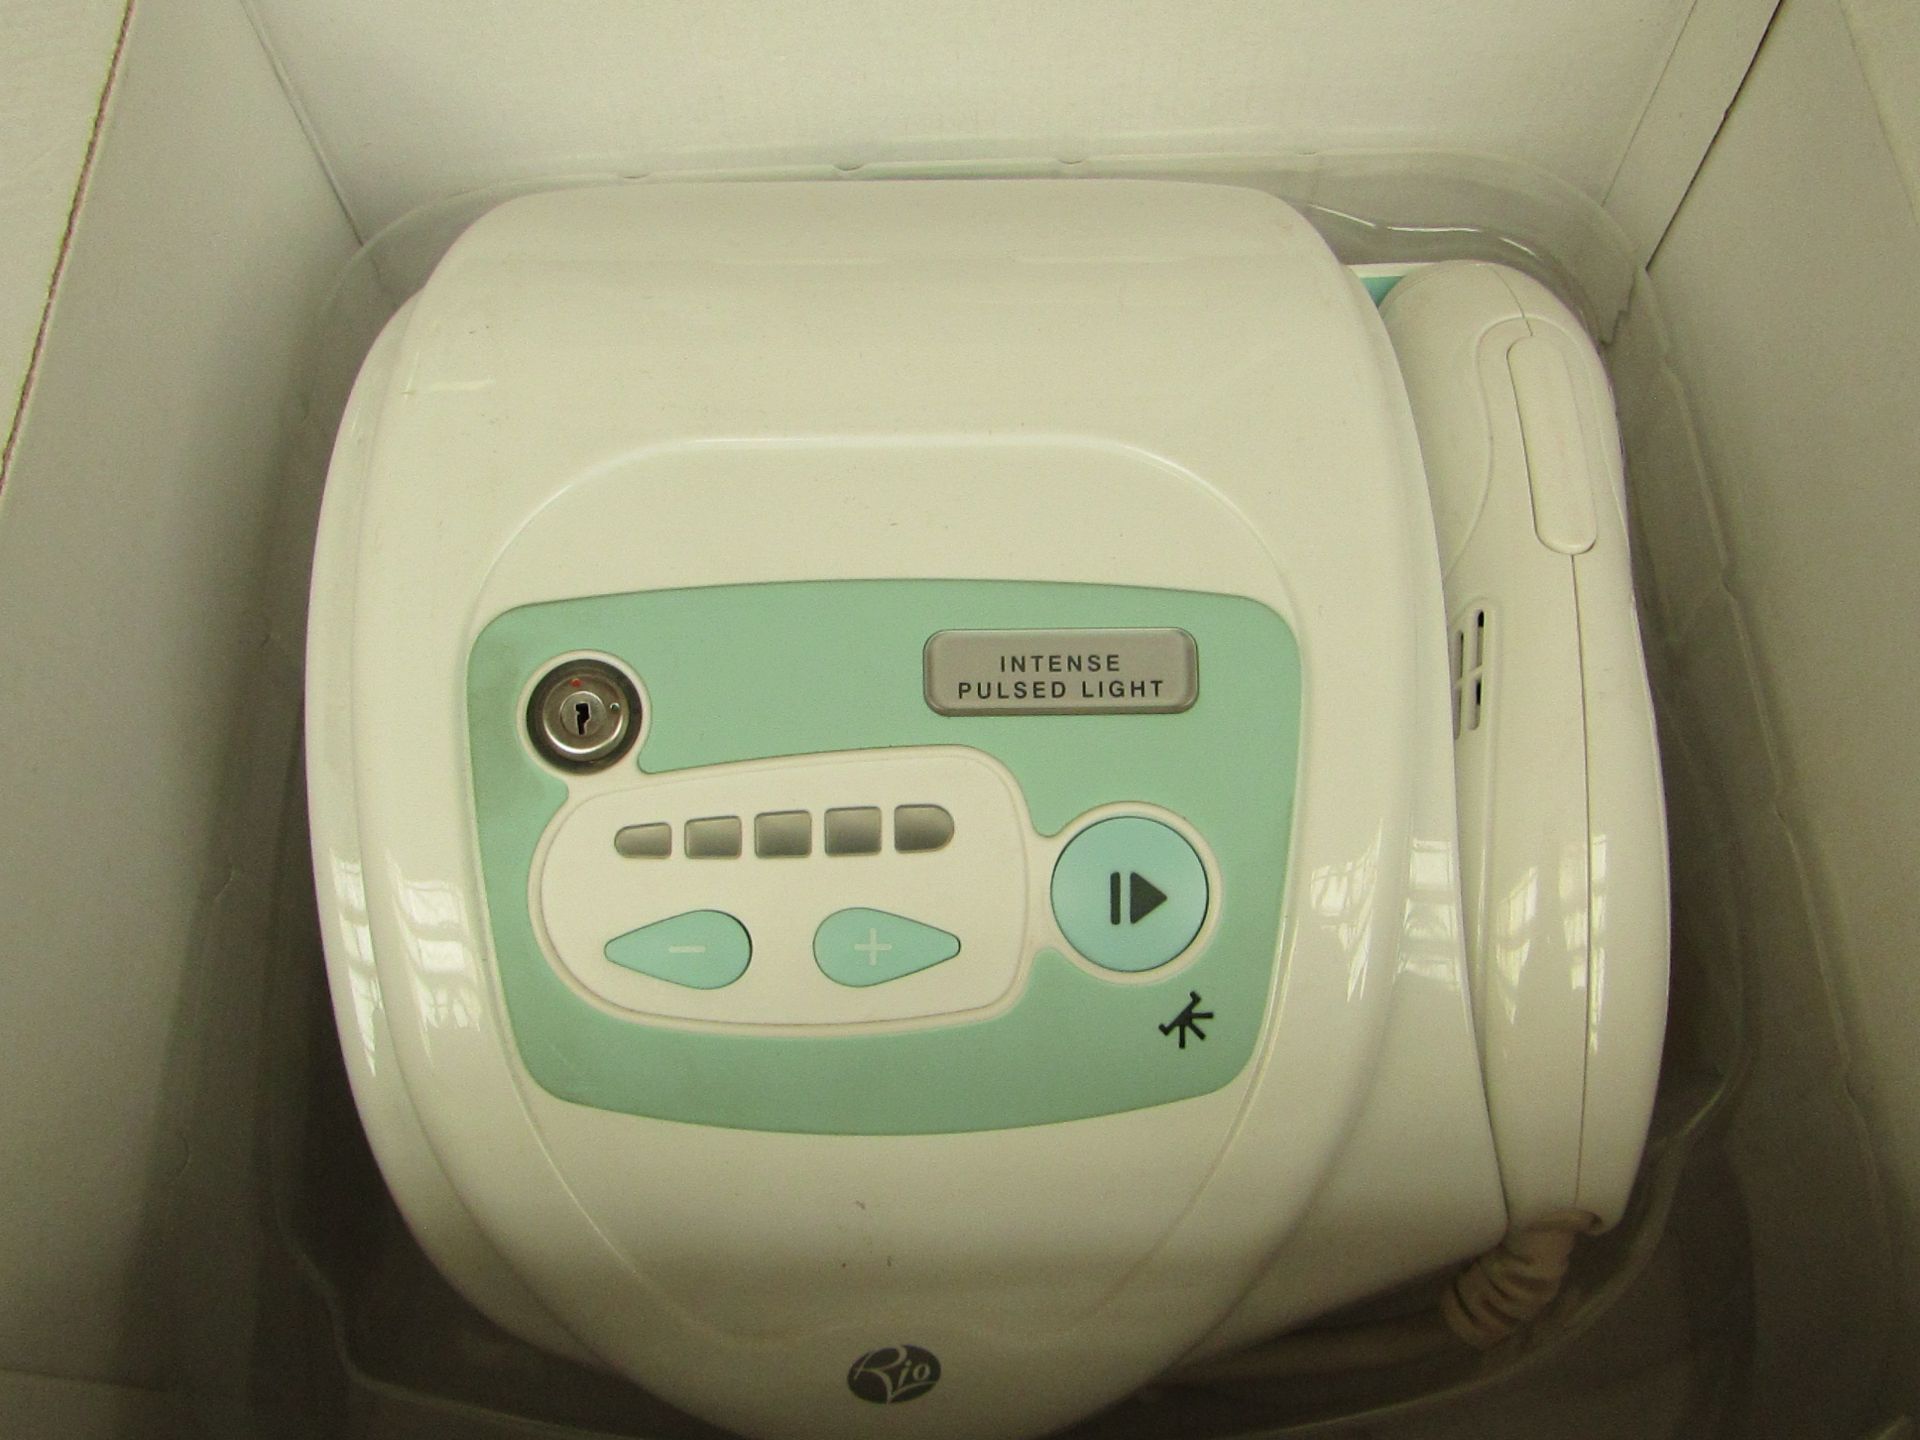 Rio Laser hair removal Machine, unused and boxed, item powers on